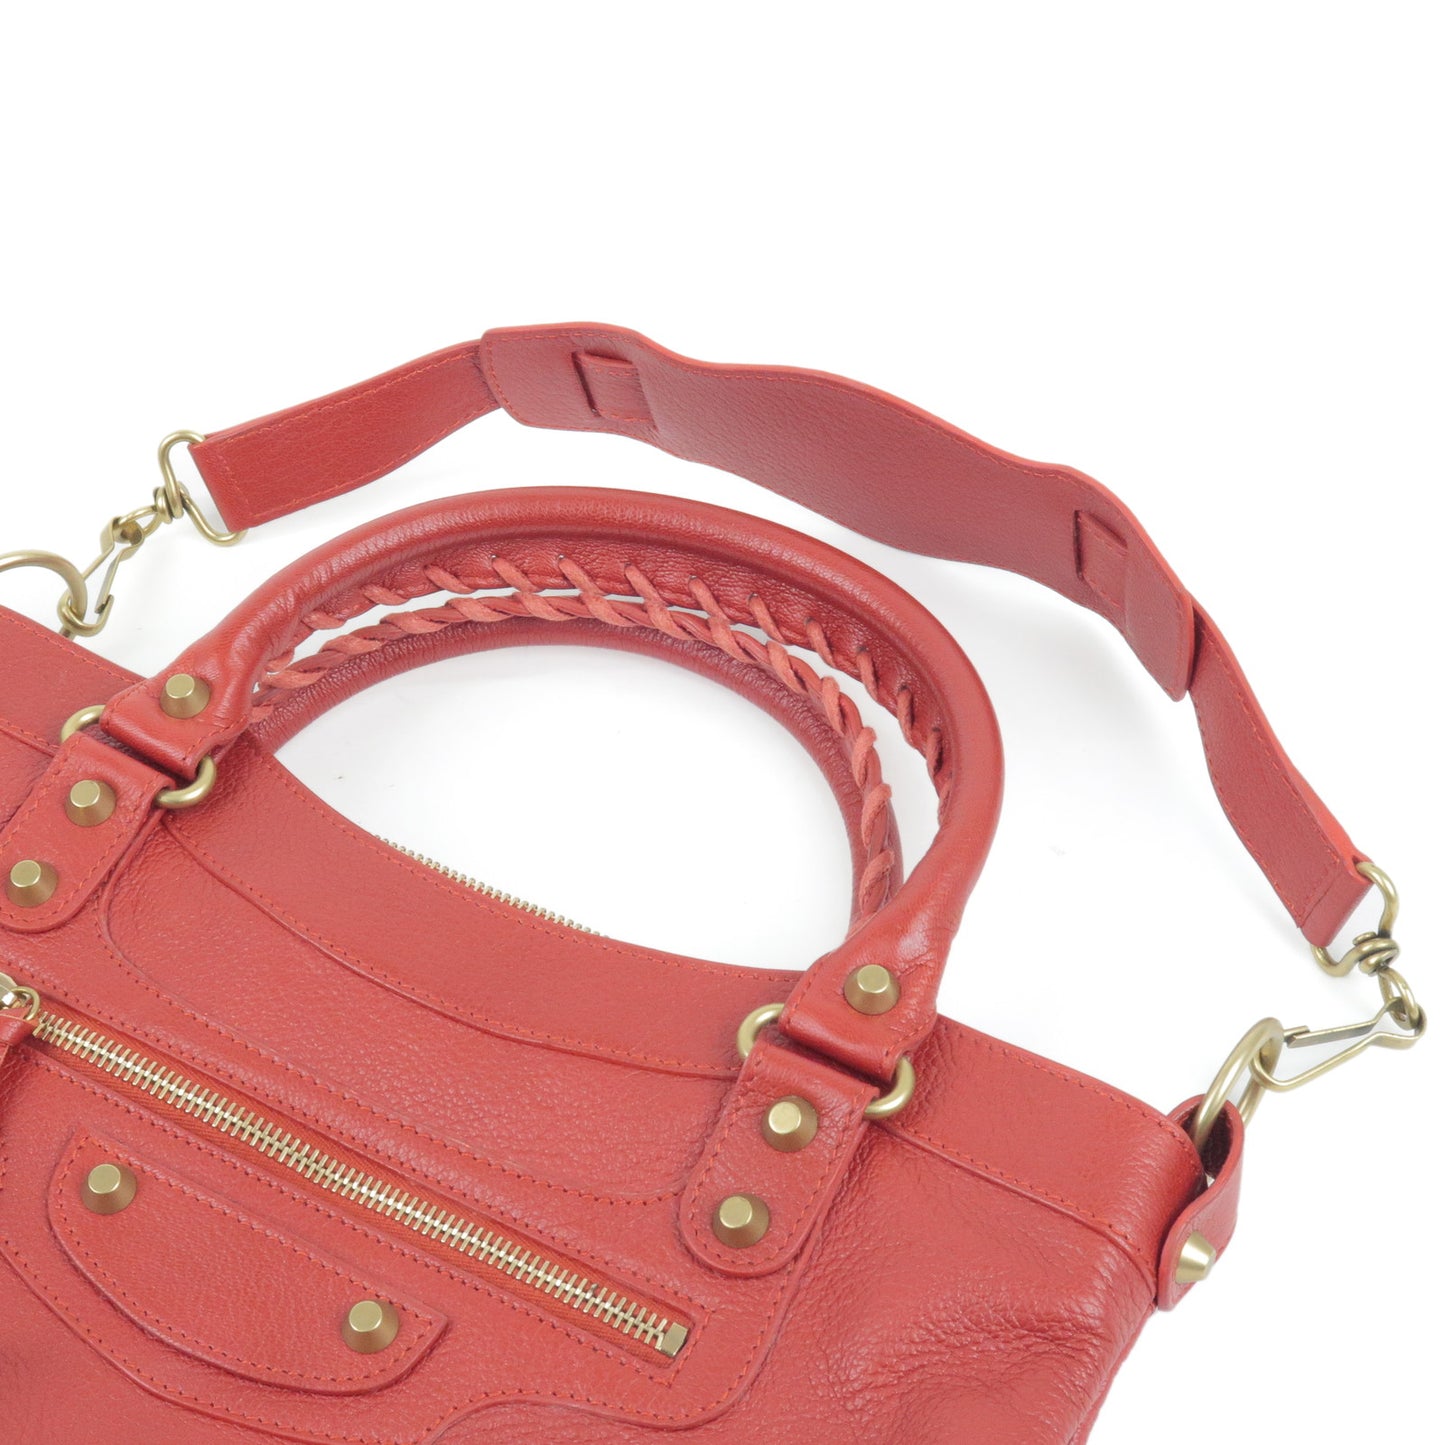 BALENCIAGA The First Leather 2Way Bag Hand Bag Red 103208